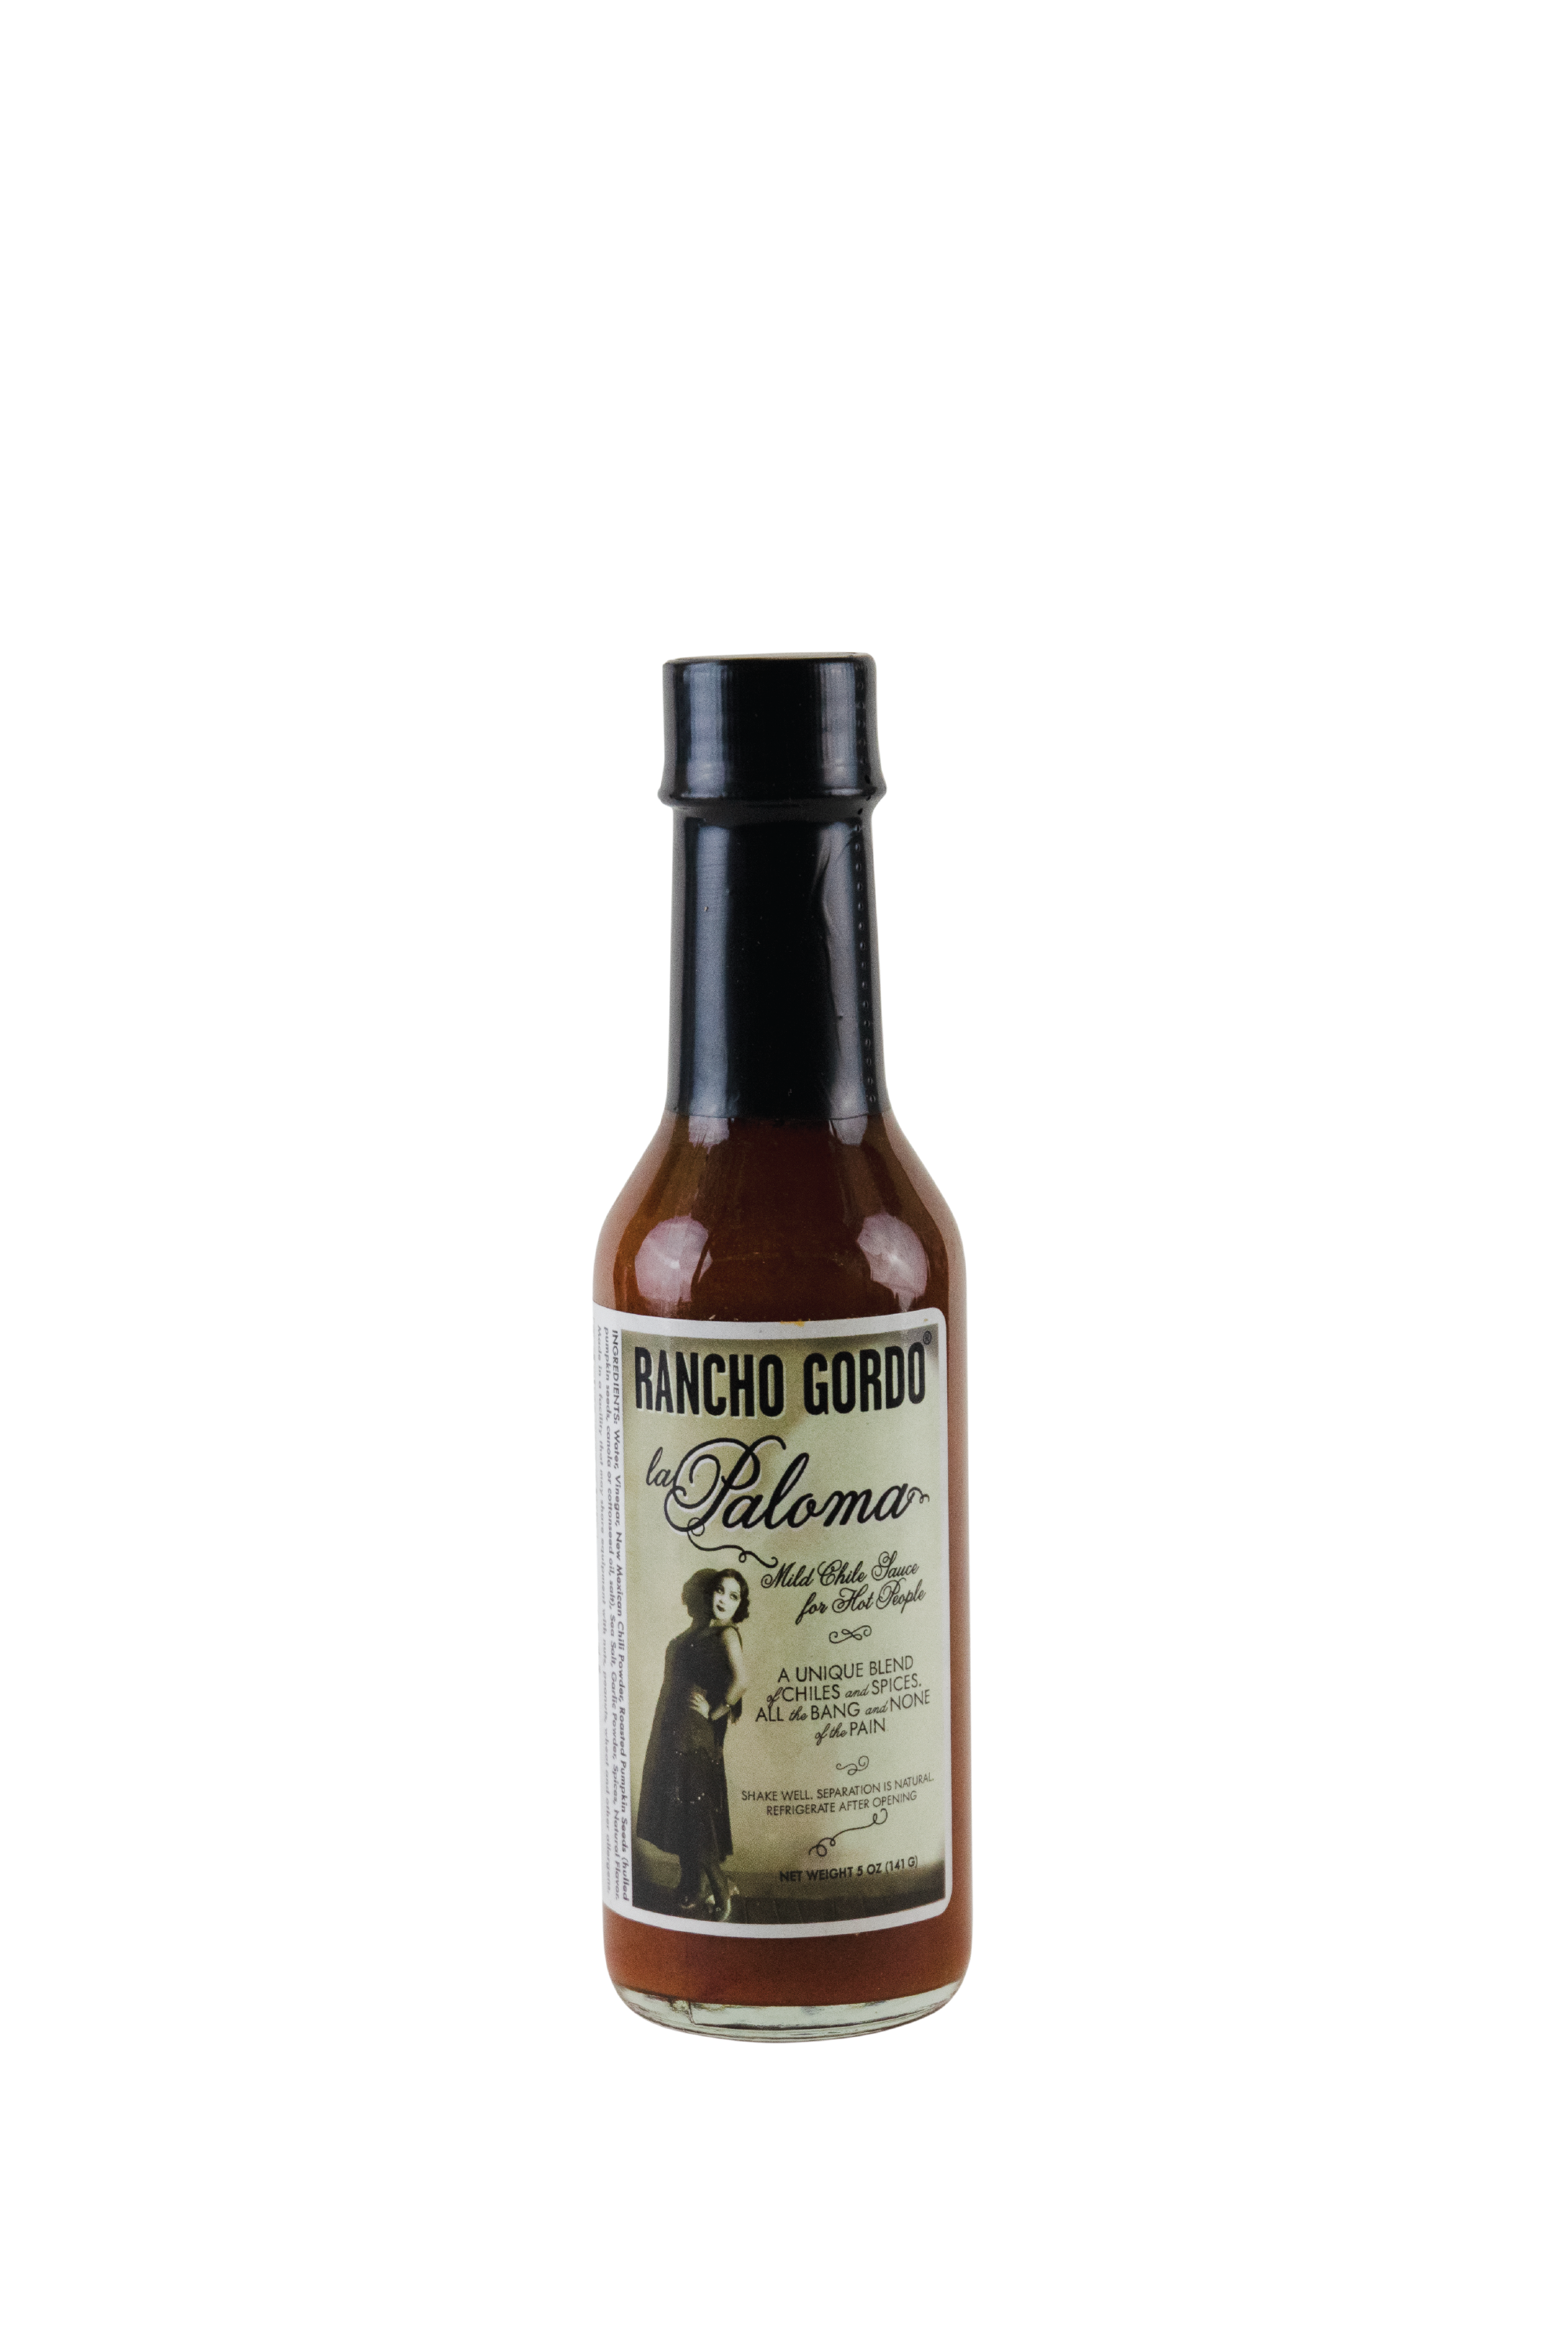 Image of a 5 oz glass bottle of Rancho Gordo La Paloma hot sauce on a white background. Label art is of a woman with dark, curly hair, who looks like she comes from the 1920s. Additional text on bottle reads: Mild chile sauce for hot people. A unique blend of chiles and spices, all the bang and none of the pain. Shake well, separation is natural, refrigerate after opening.